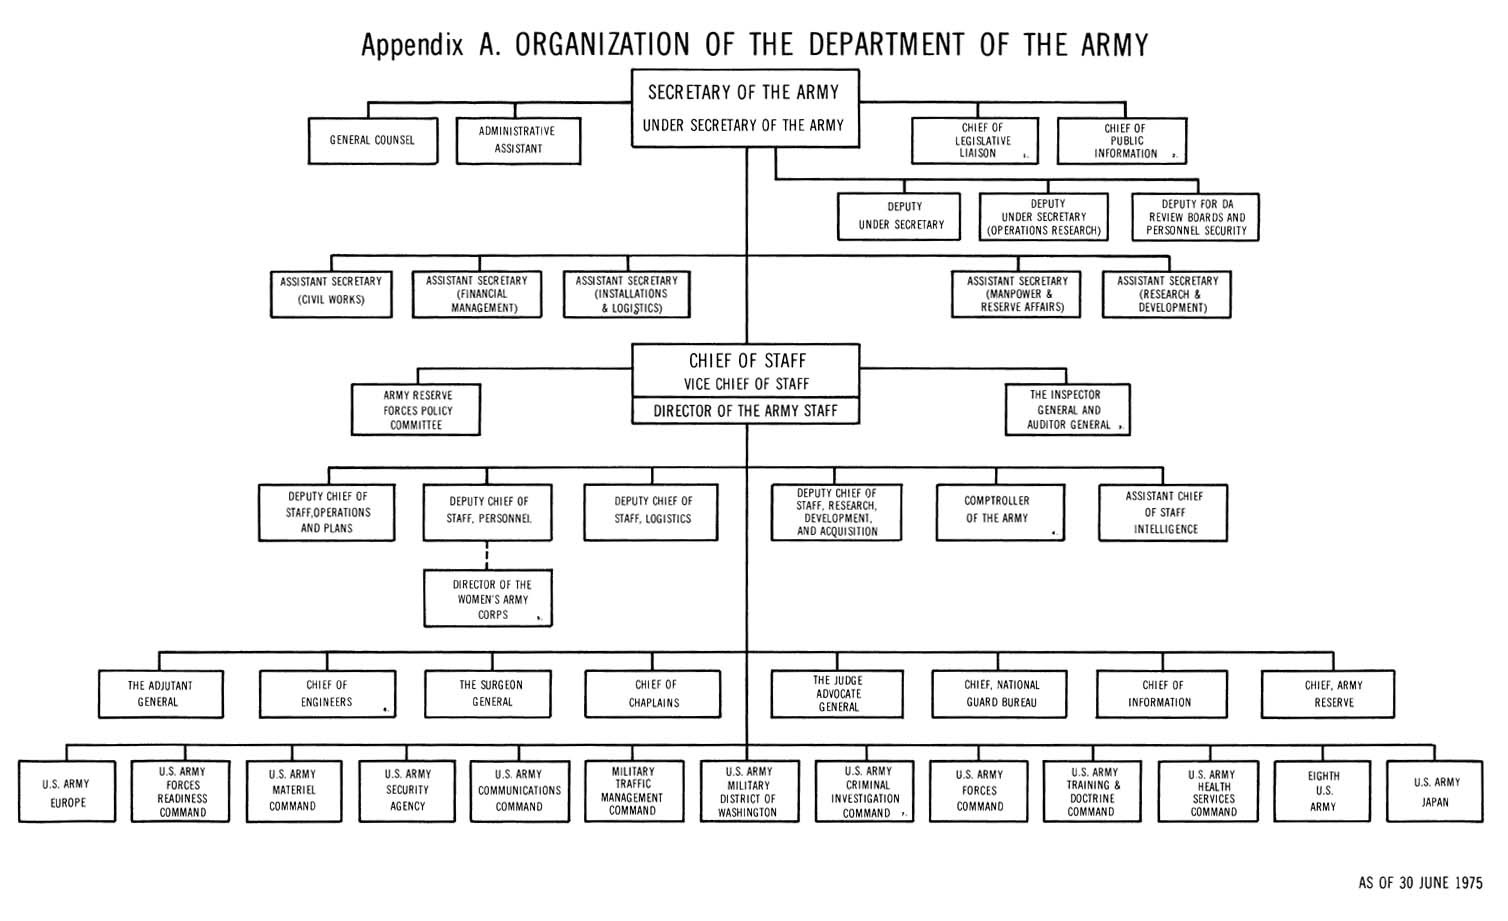 Chart, Appendix A. Organization of the Department of the Army